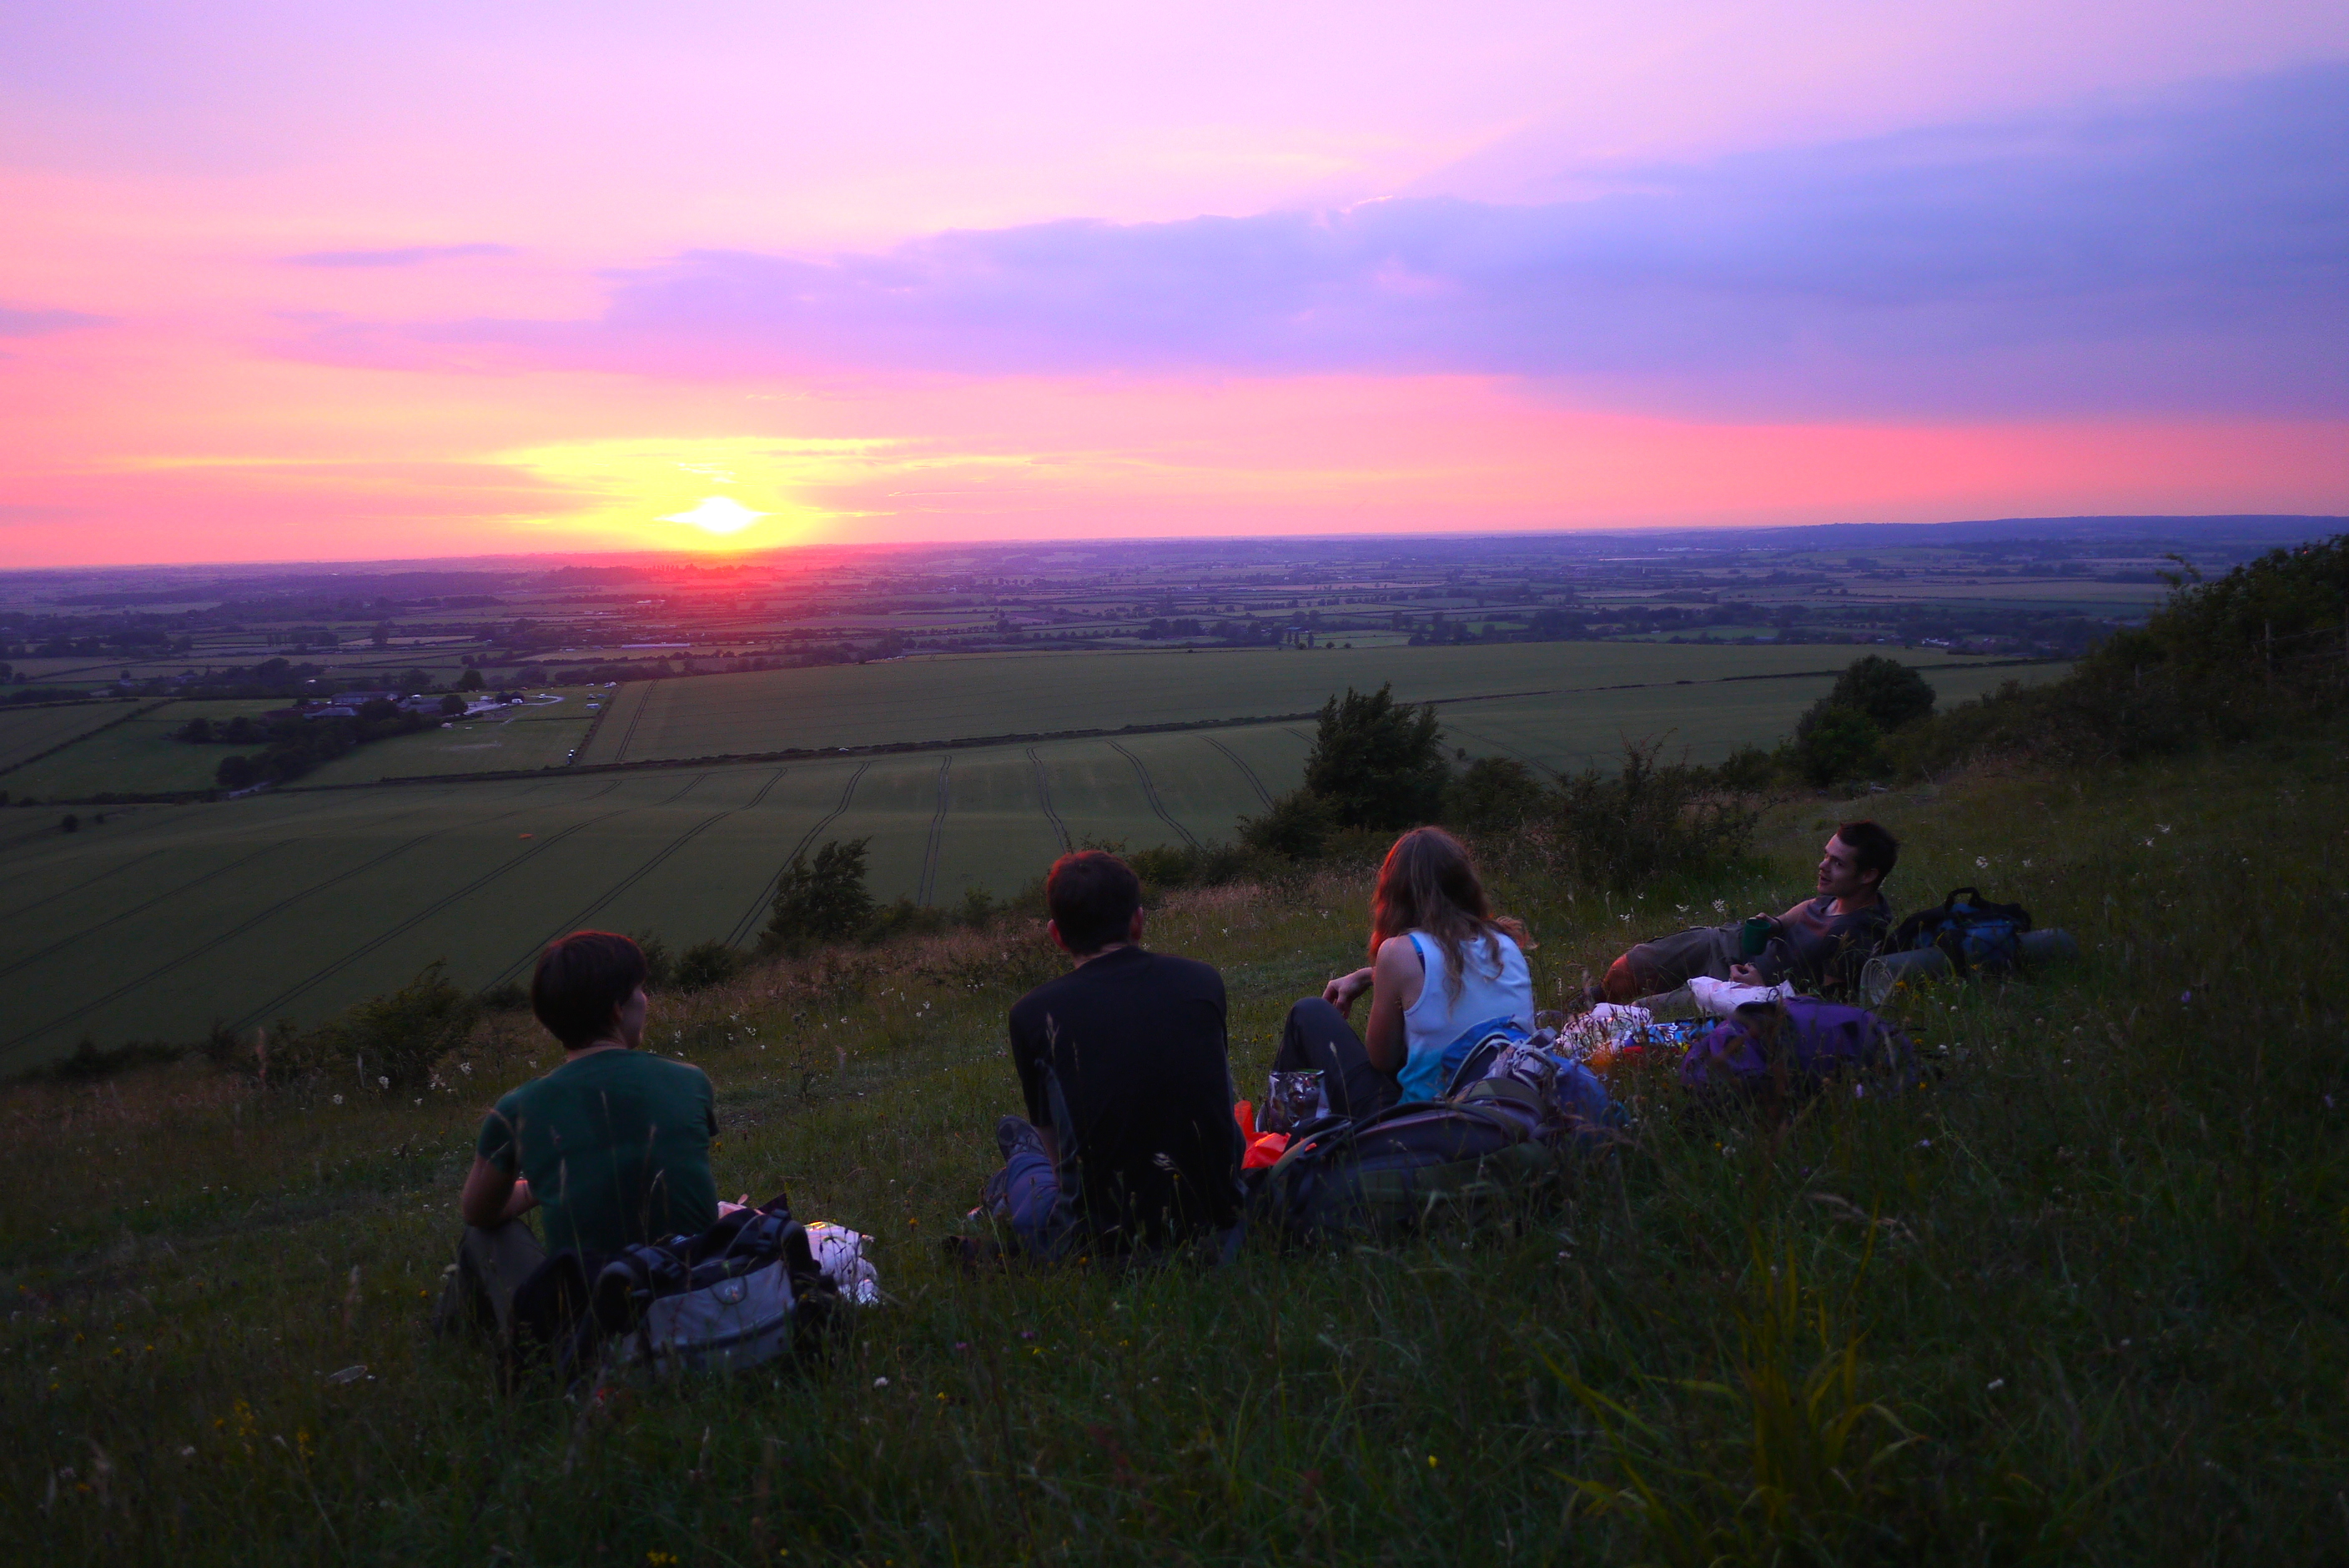 Sunset at Ivinghoe Beacon, near Tring